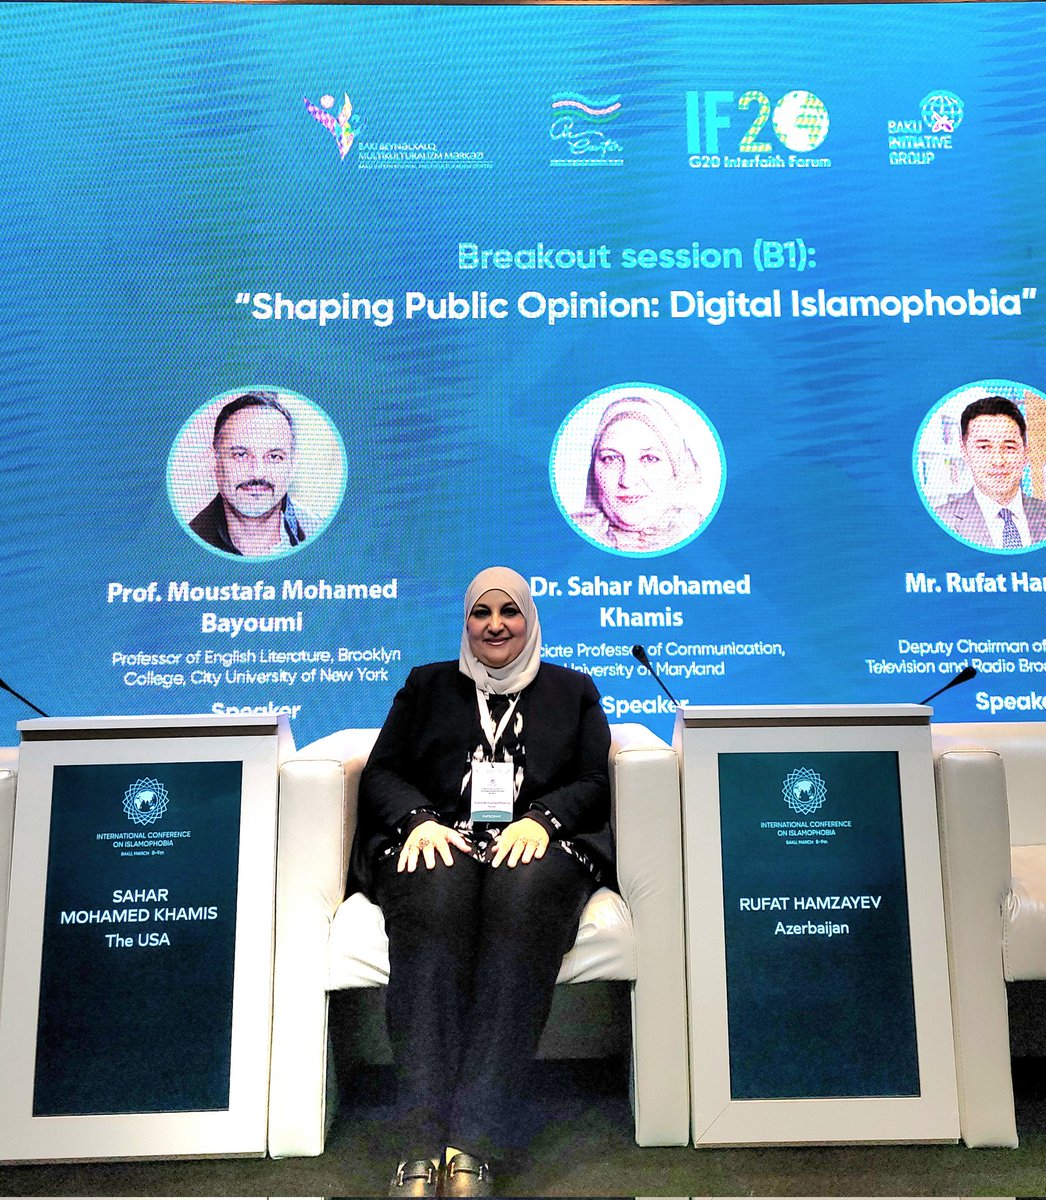 Today, March 15, is the #UN-launched #InternationalDayToCombatIslamophobia. I had the honor of speaking at the #International #Conference on #Islamophobia in #Baku, #Azerbaijan, March 8-9, titled 'Embracing #Diversity: Tackling Islamophobia in 2024.' It was a great experience!